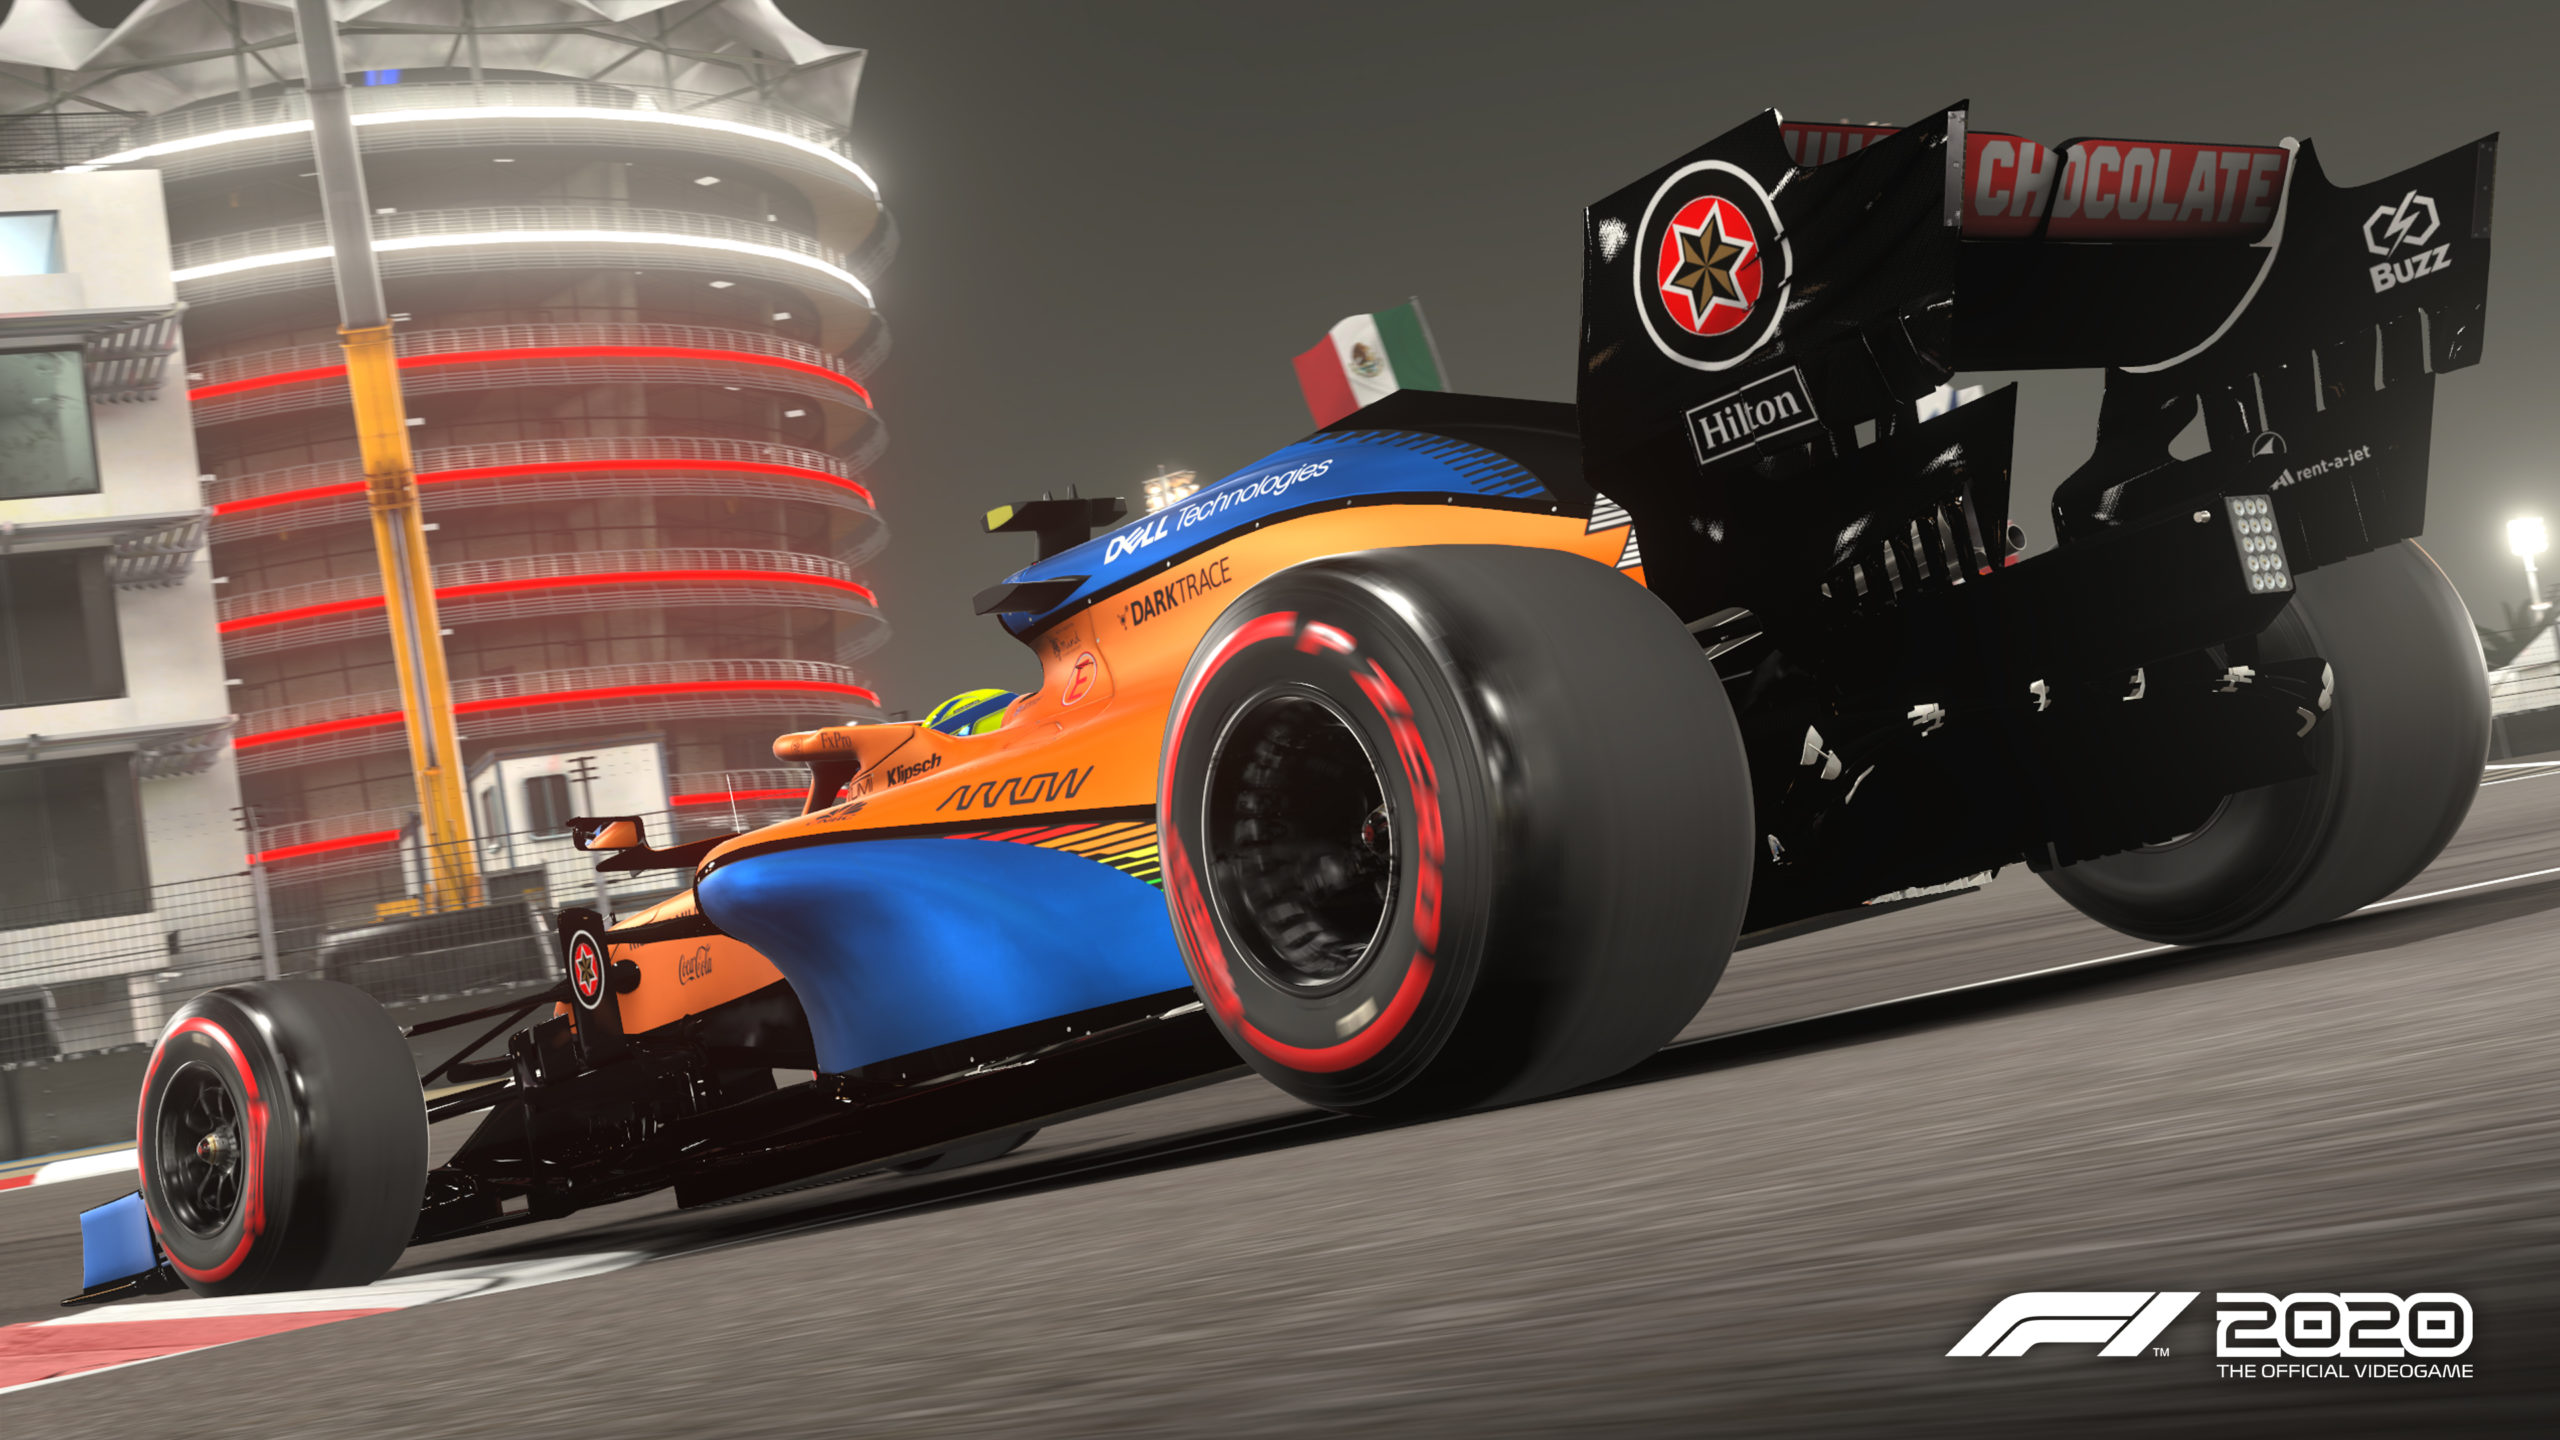 F1 22 Update 1.18 Patch Notes